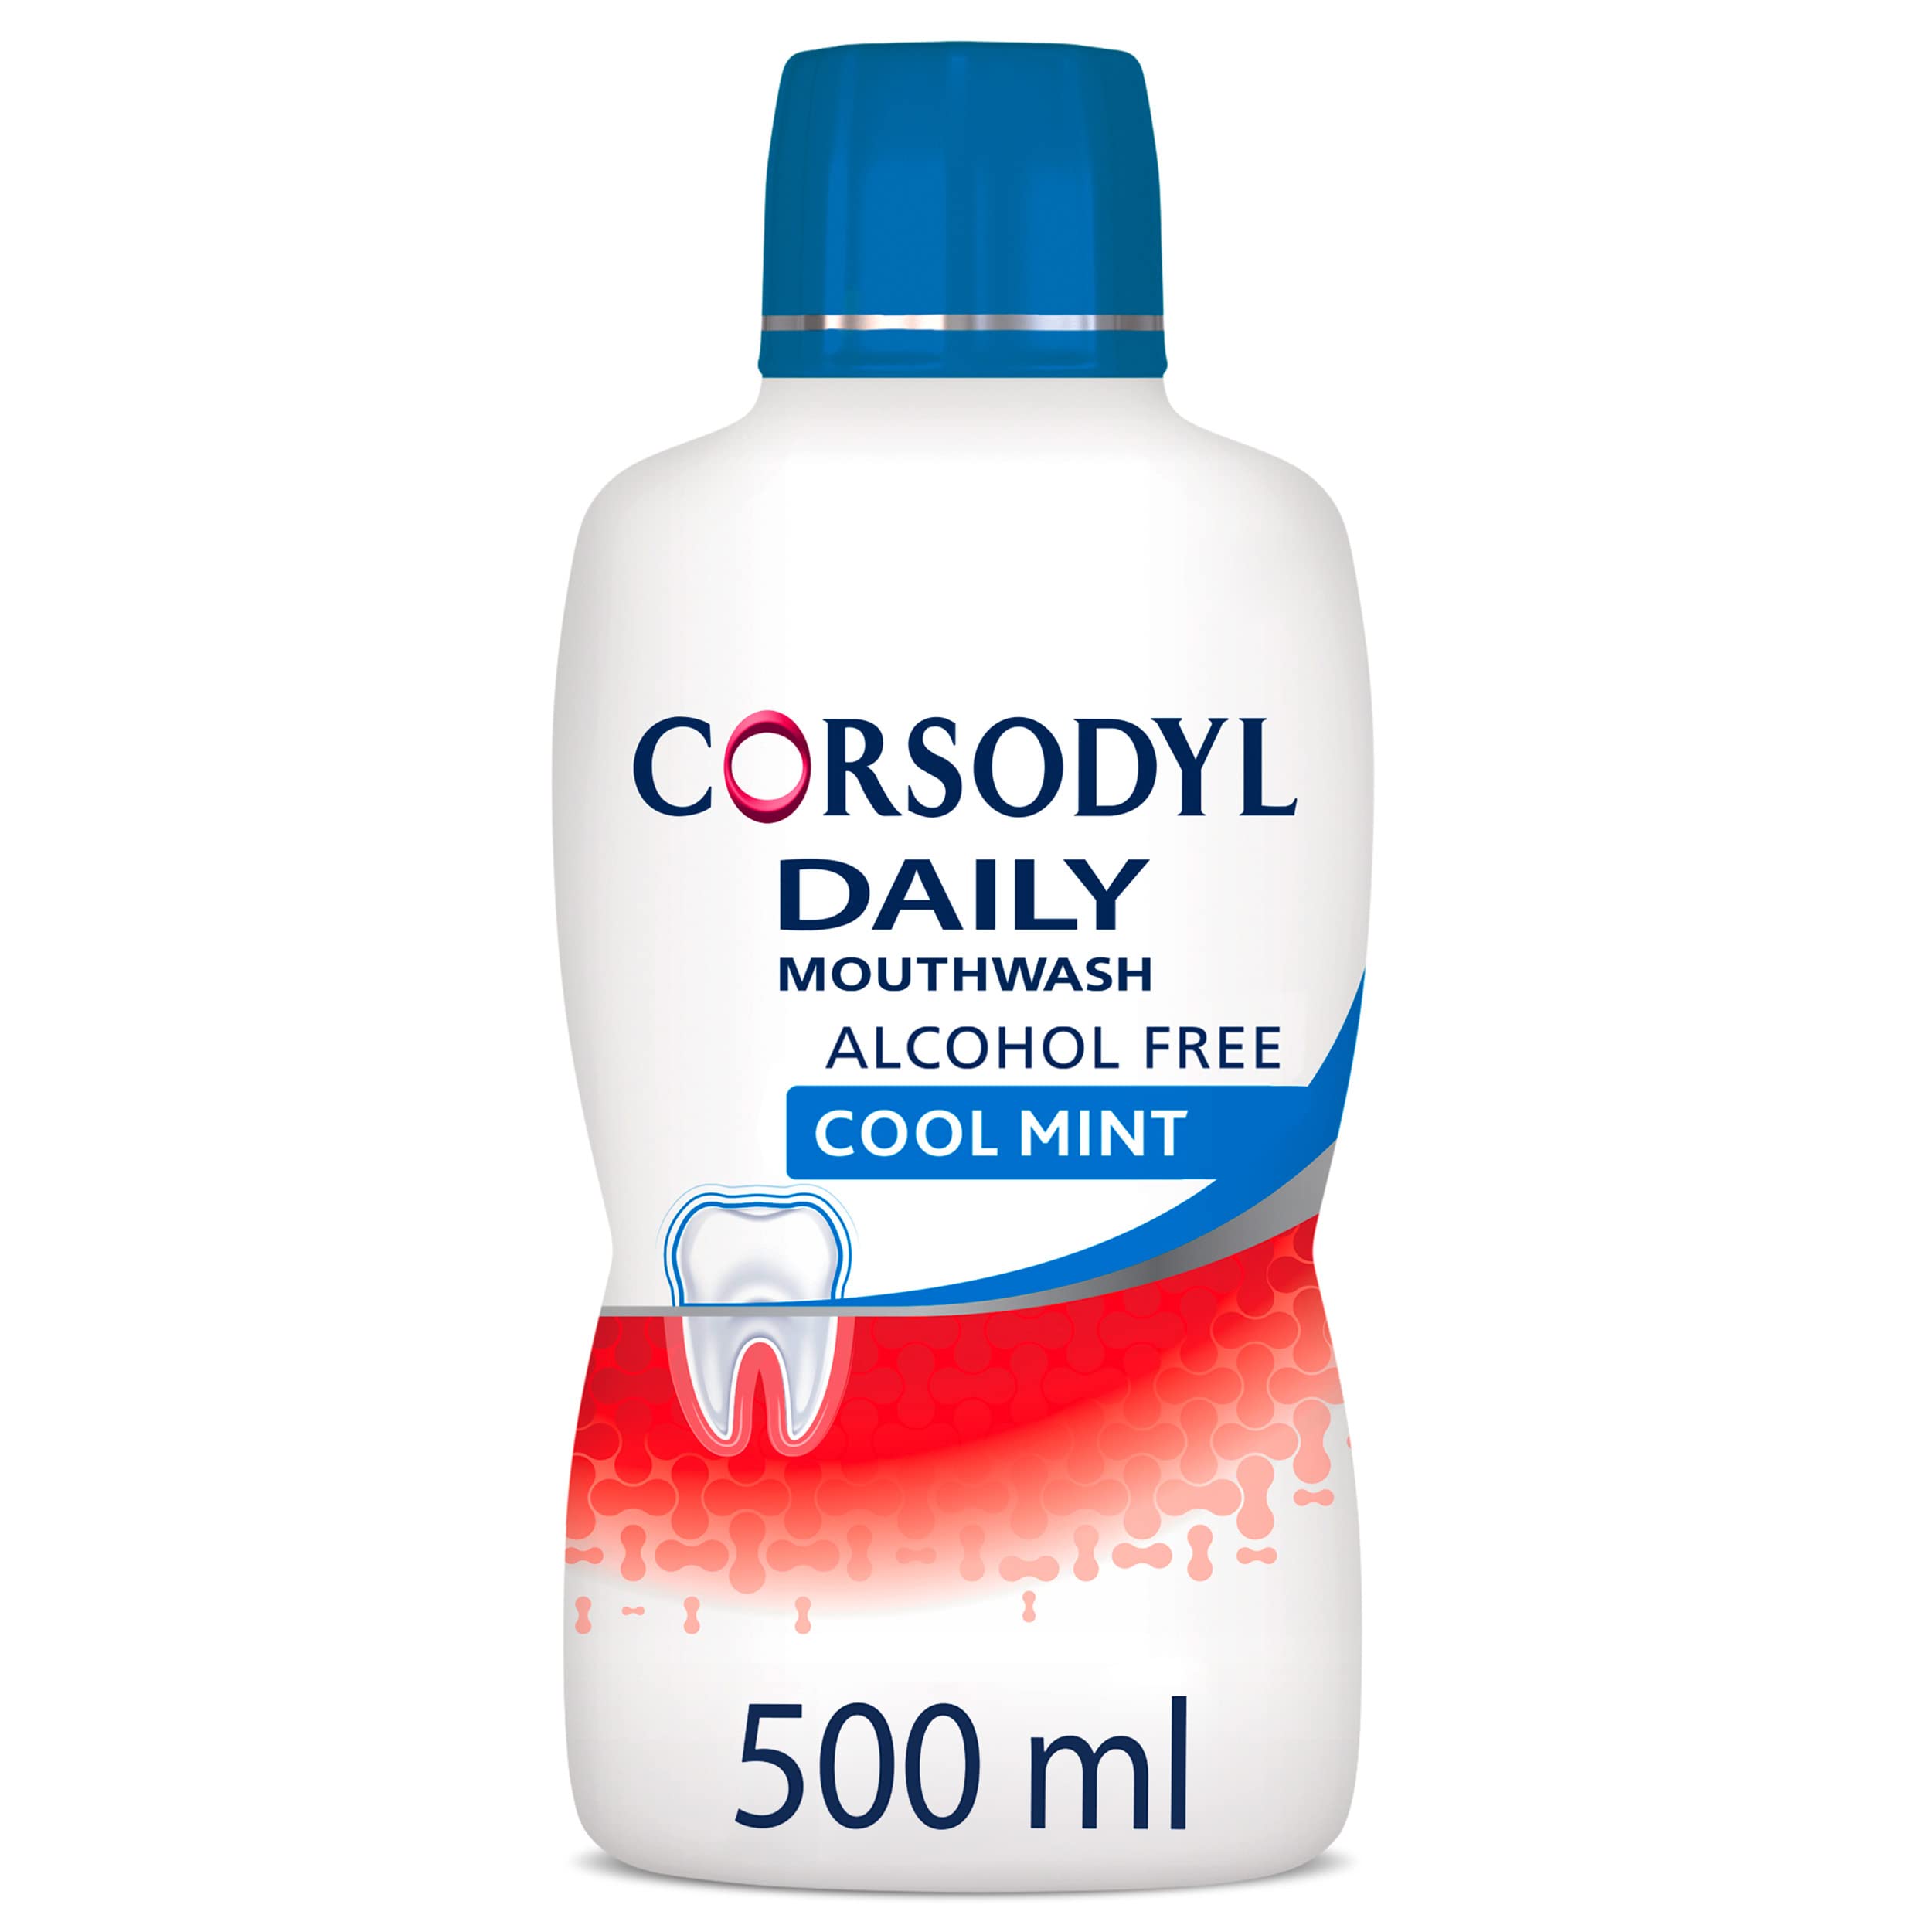 Corsodyl Daily Gum Care Mouthwash Alcohol Free Cool Mint